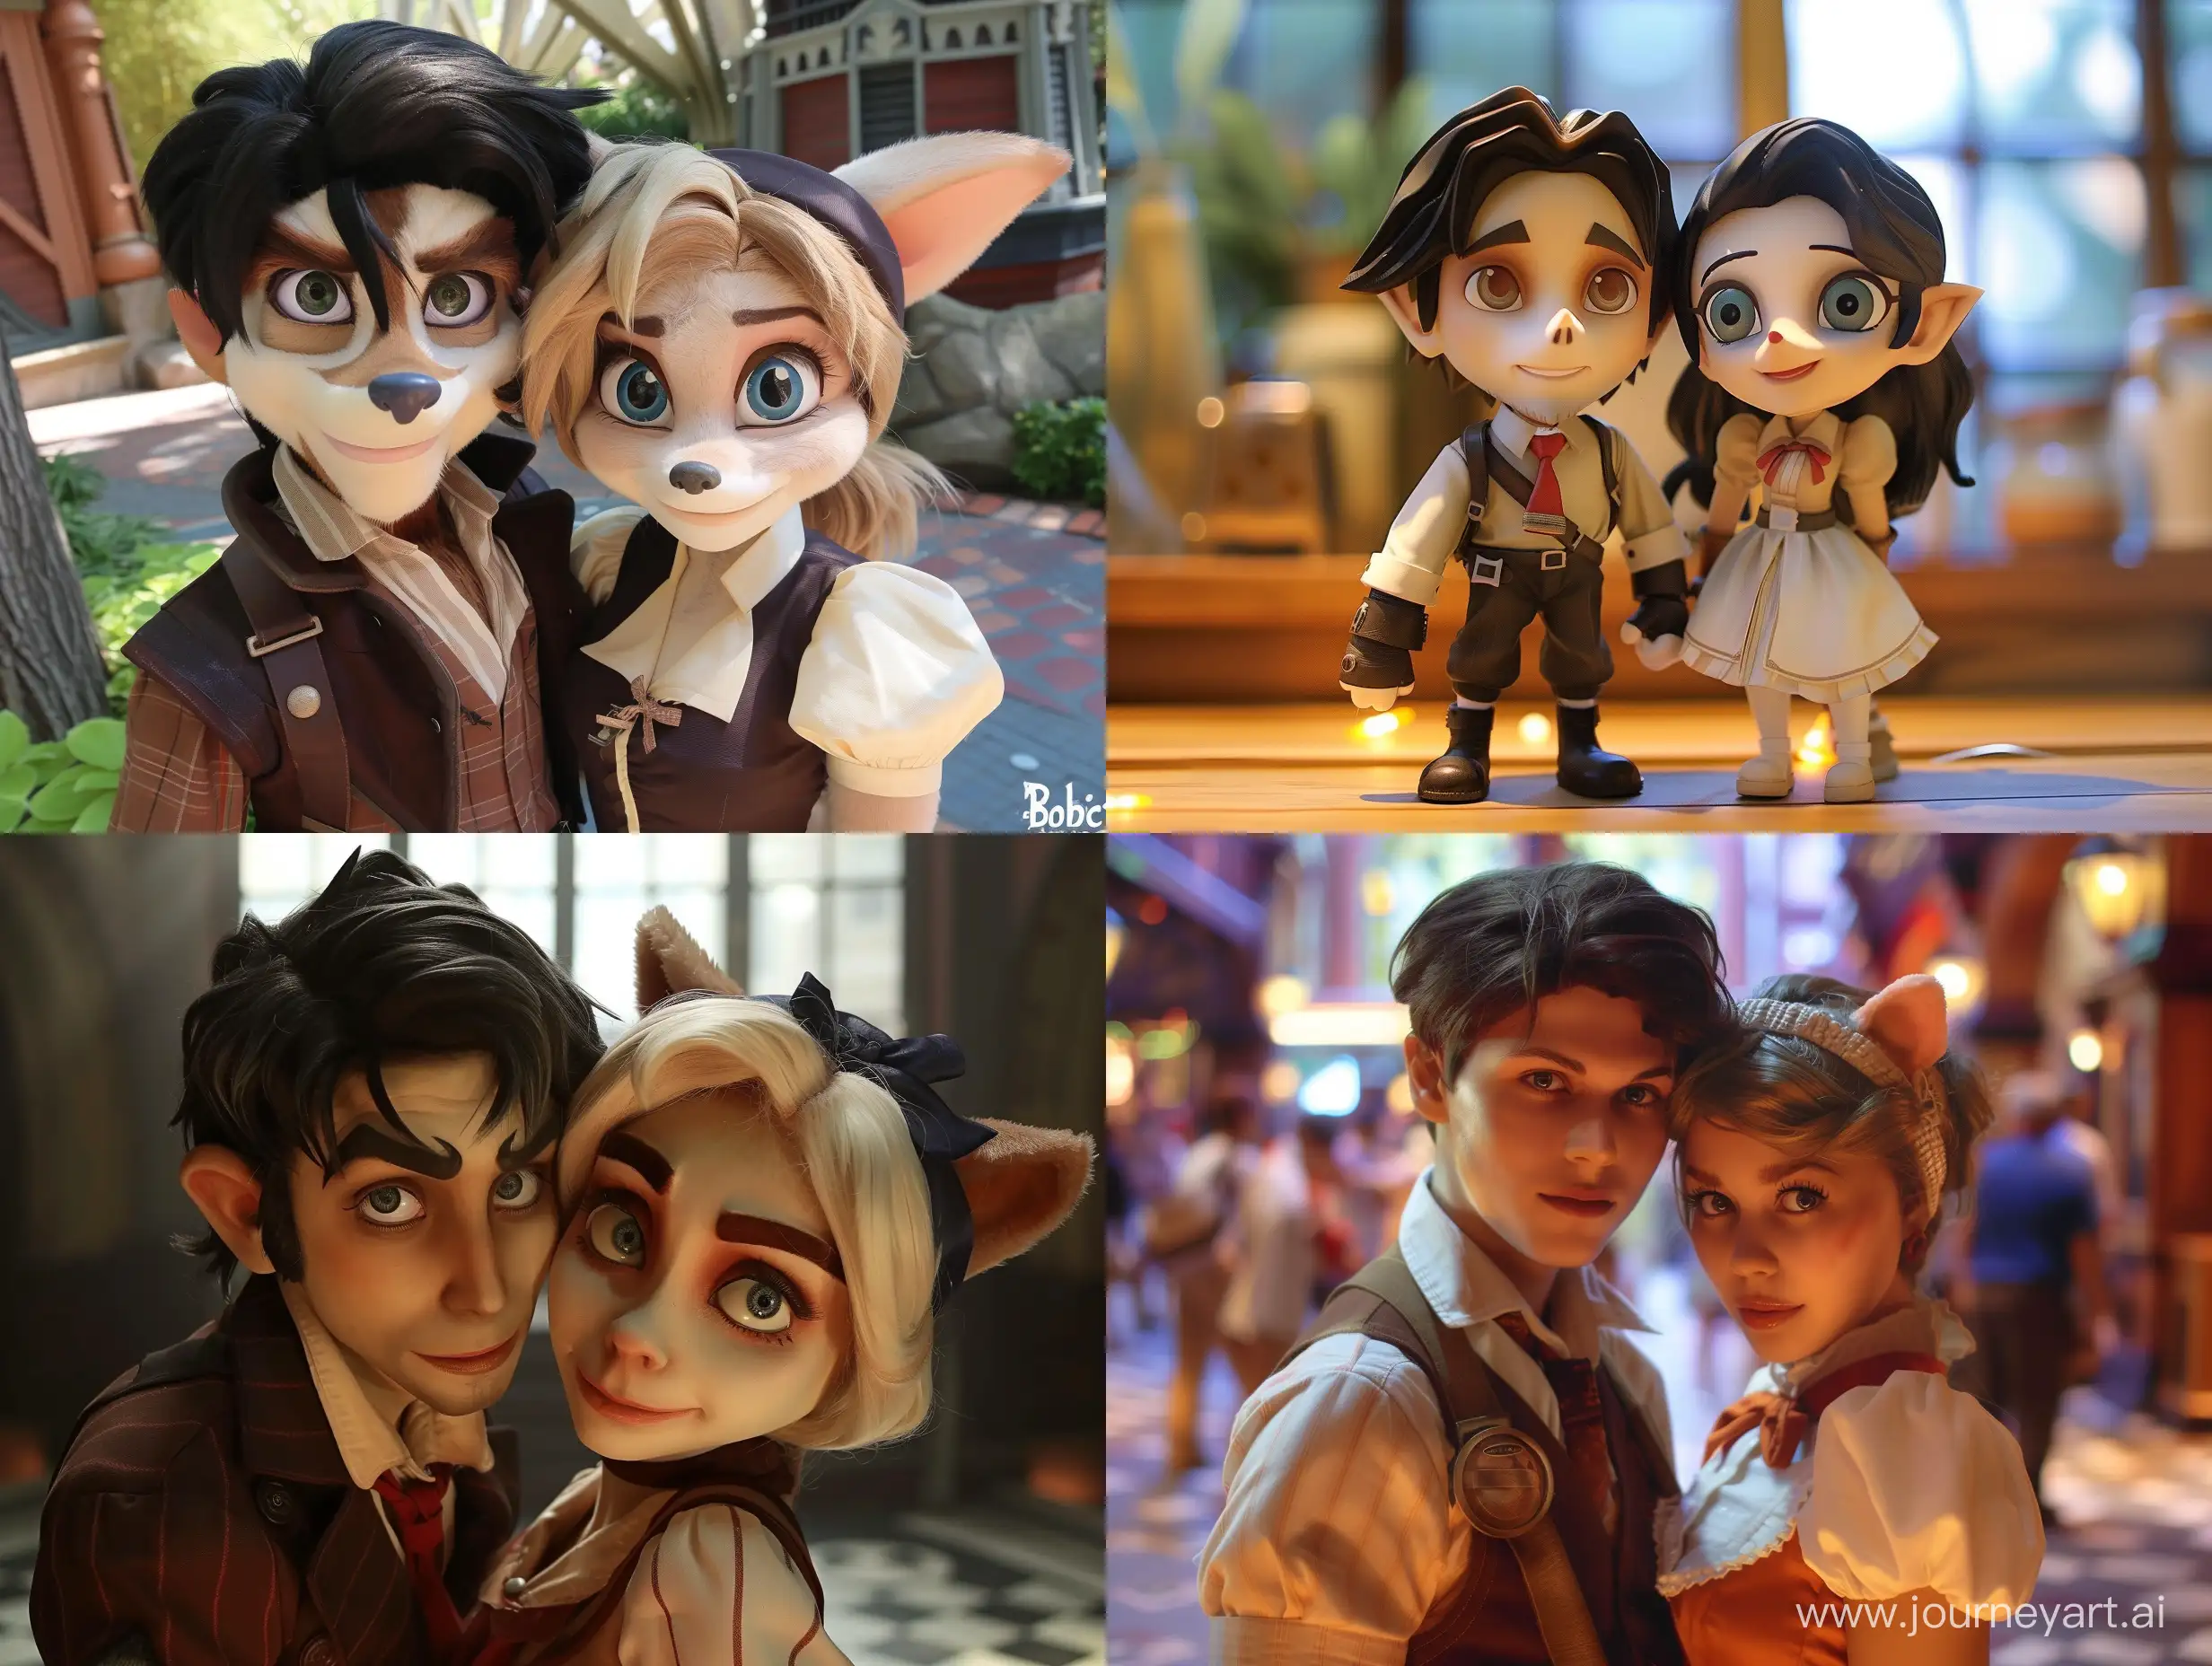 Cosplaying-Bandicoots-as-Booker-DeWitt-and-Elizabeth-from-Bioshock-Infinite